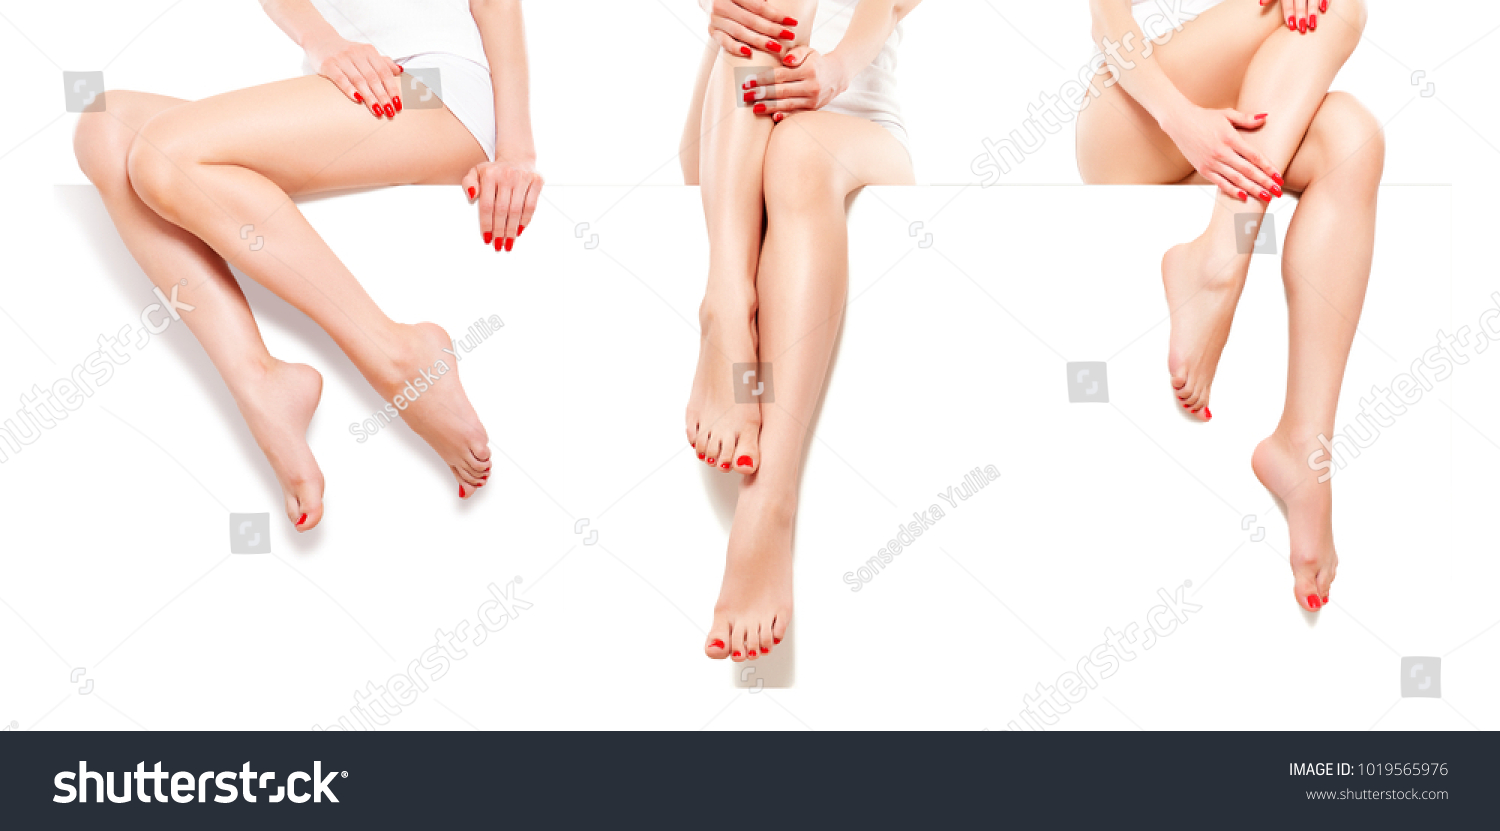 Three beautiful slim womans with red manicure, sitting at banner, isolated on white background #1019565976